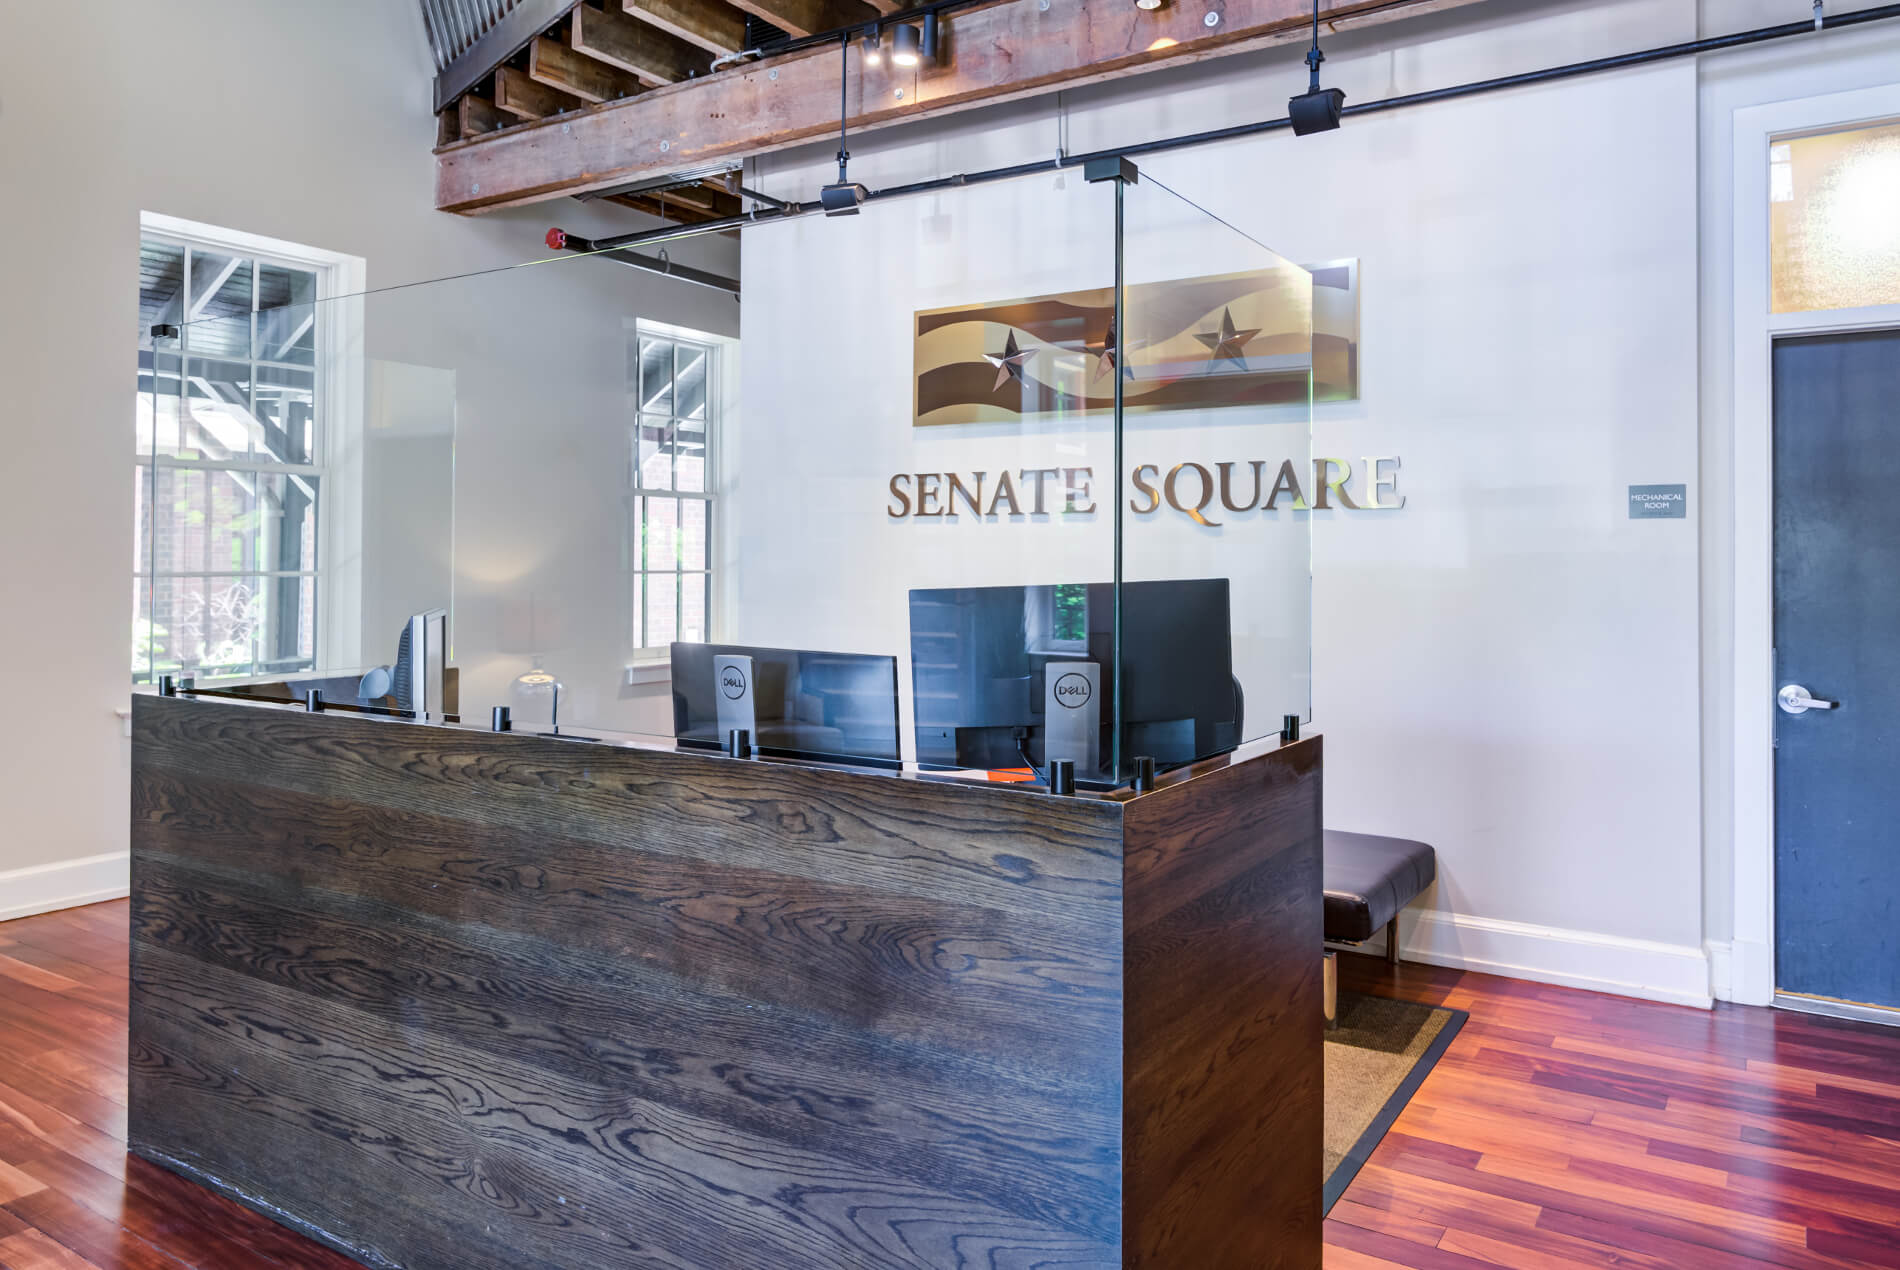 Lobby with concierge desk and Senate Square logo wall art